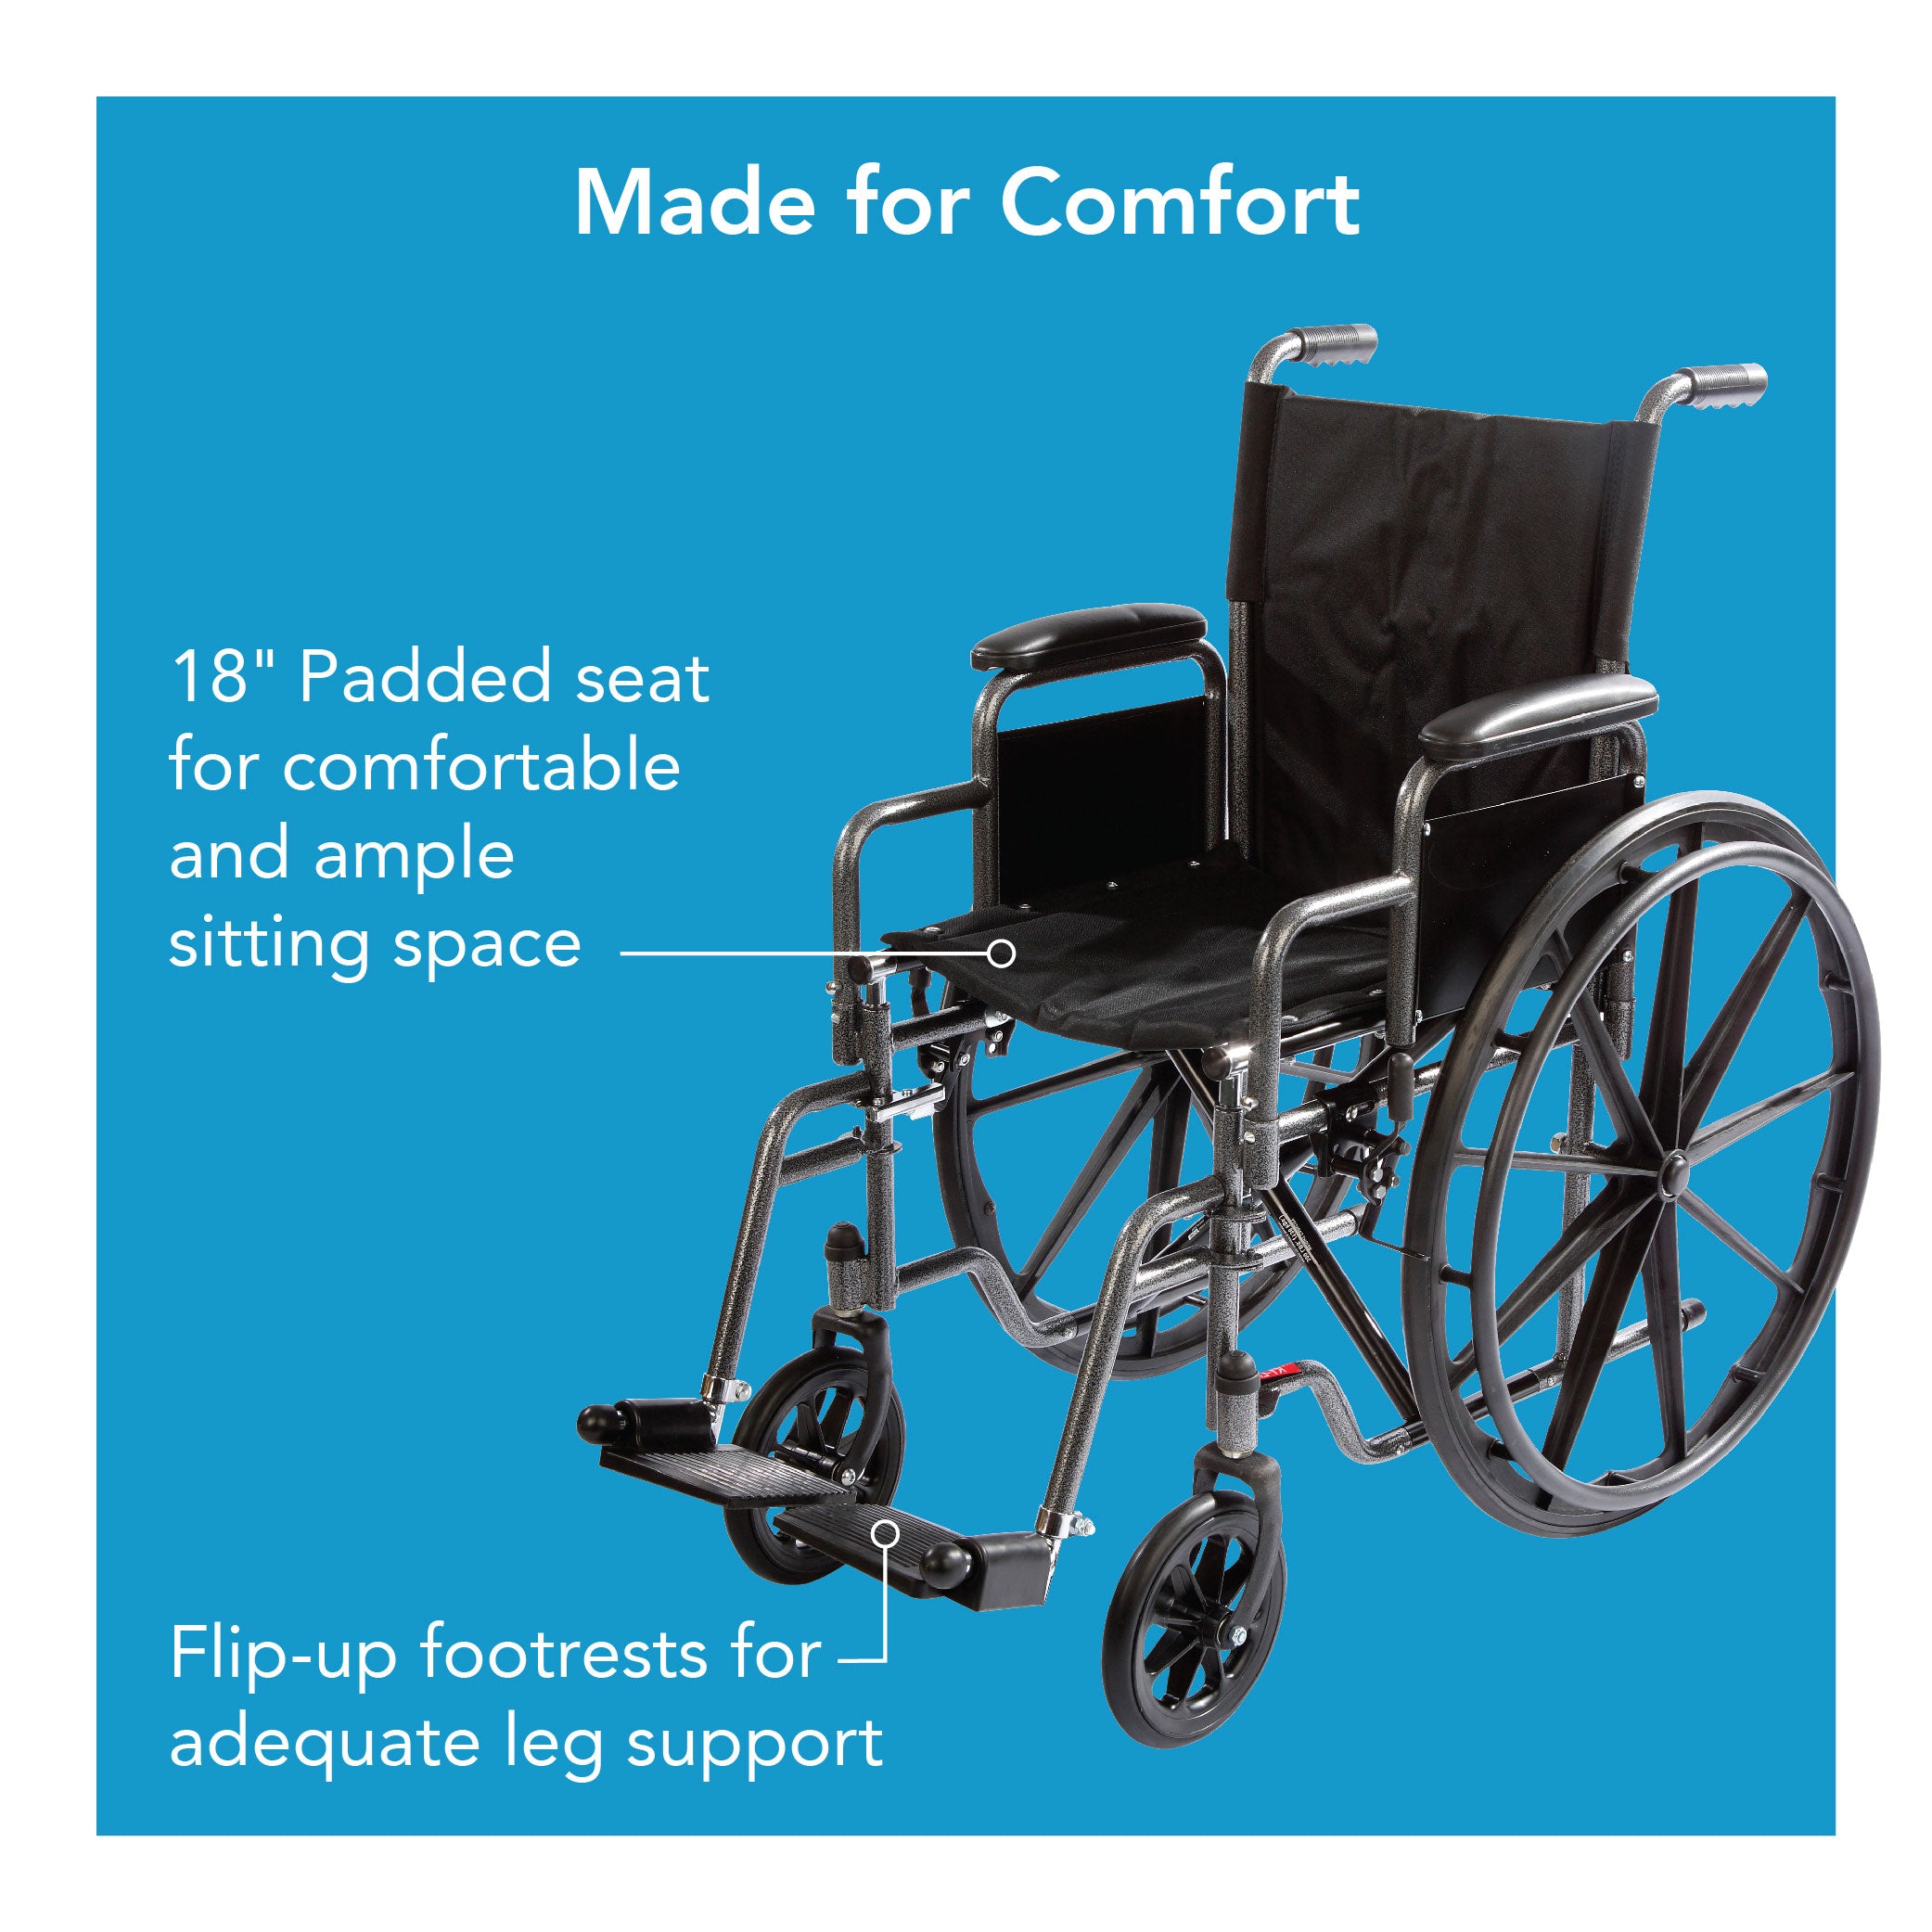 Carex Wheelchair With Large 18” Padded Seat - Carex Health Brands